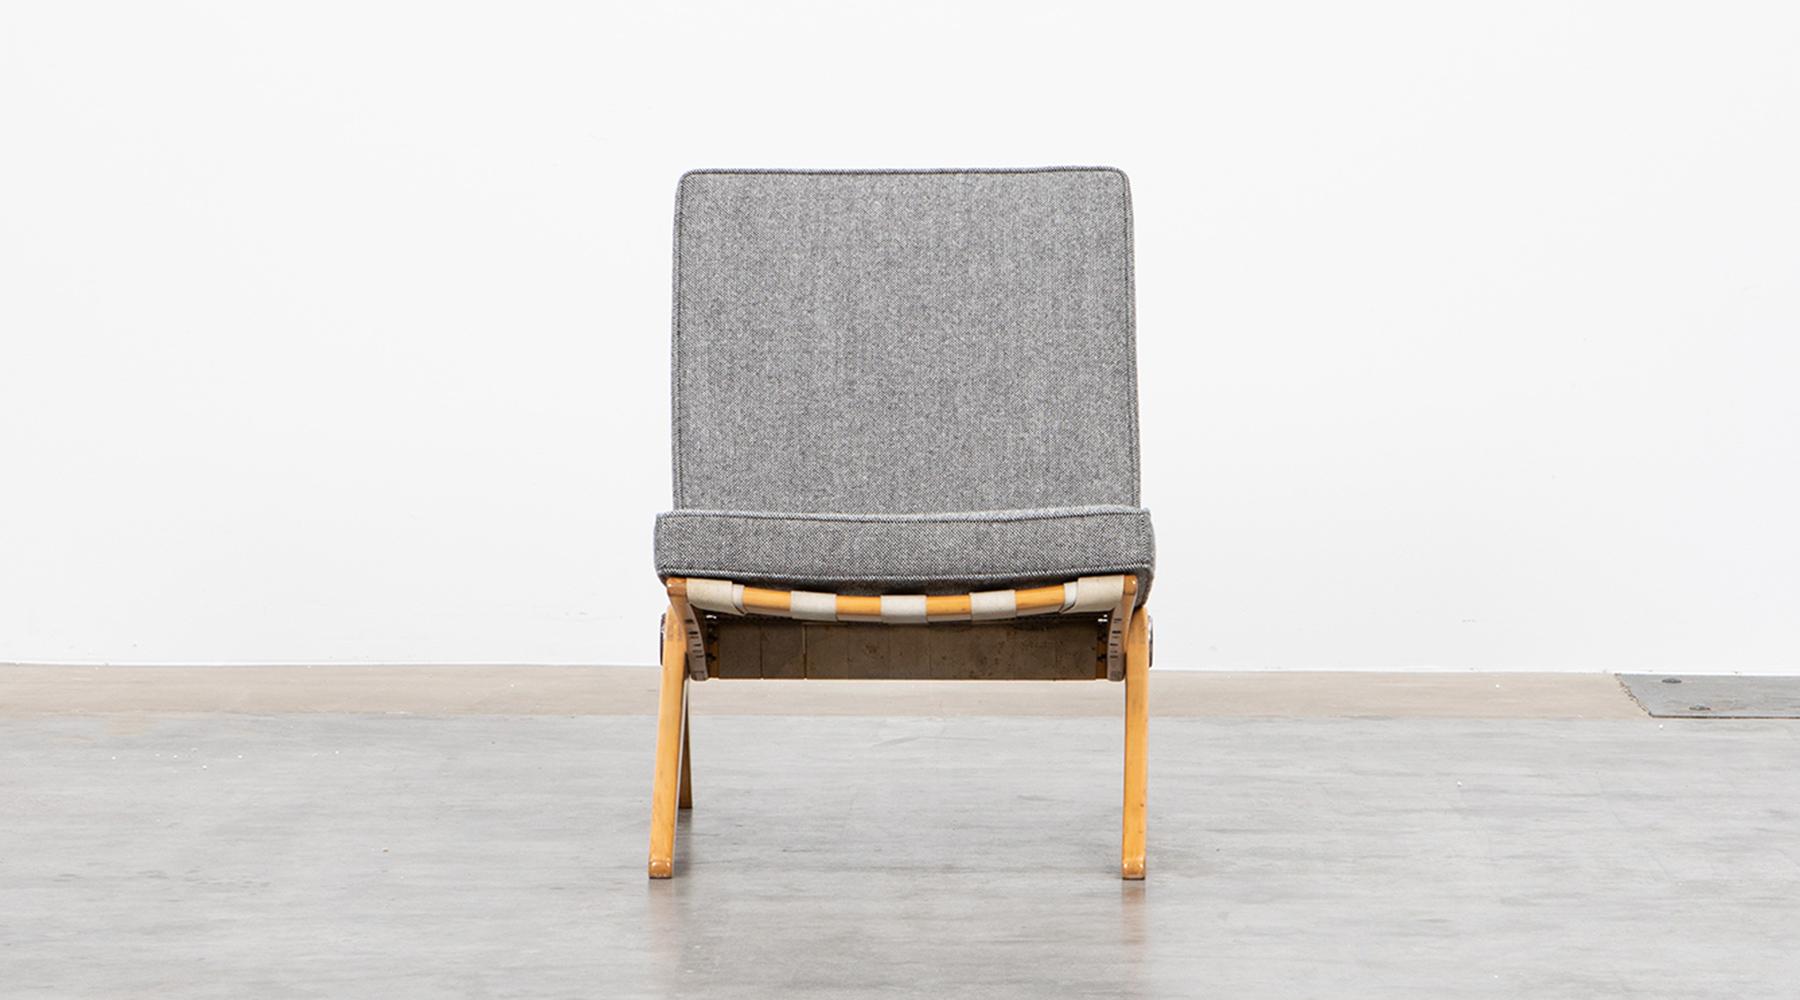 Easy chair designed by Pierre Jeanneret, new upholstery in woolen fabric, USA, 1952.

Astounding of subtle and classic easy chairs by Jeanneret featuring solid and carefully shaped wooden feet. Manufactured by Knoll International. 

Swiss-born